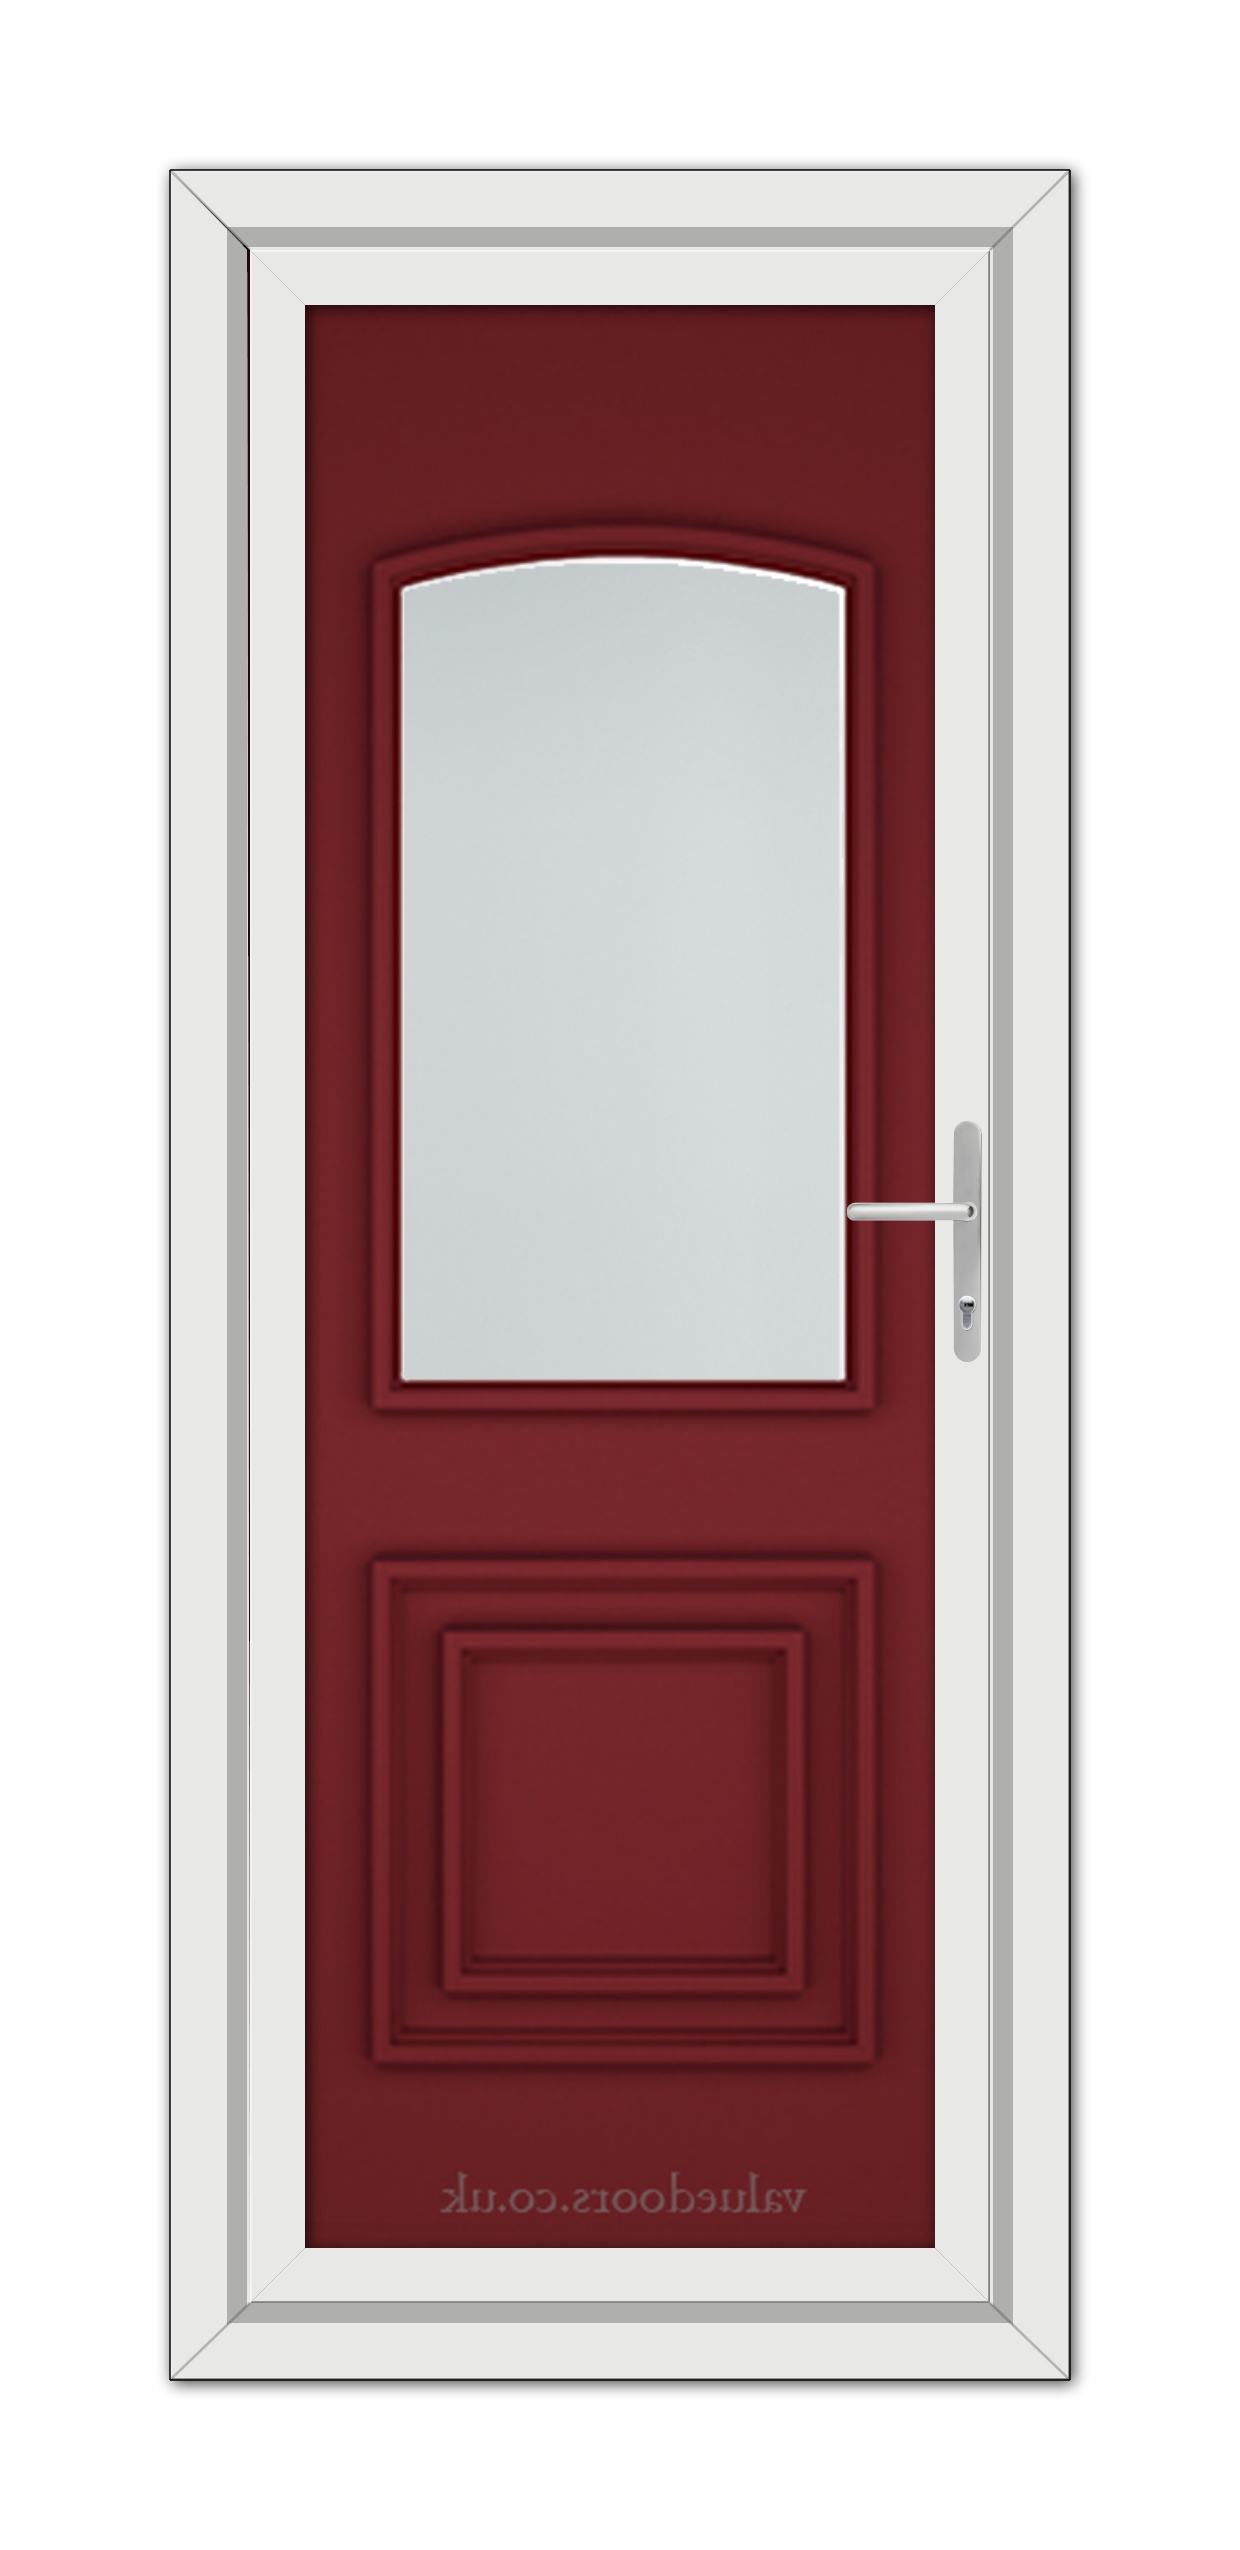 A Red Balmoral Classic uPVC Door with a glass panel.